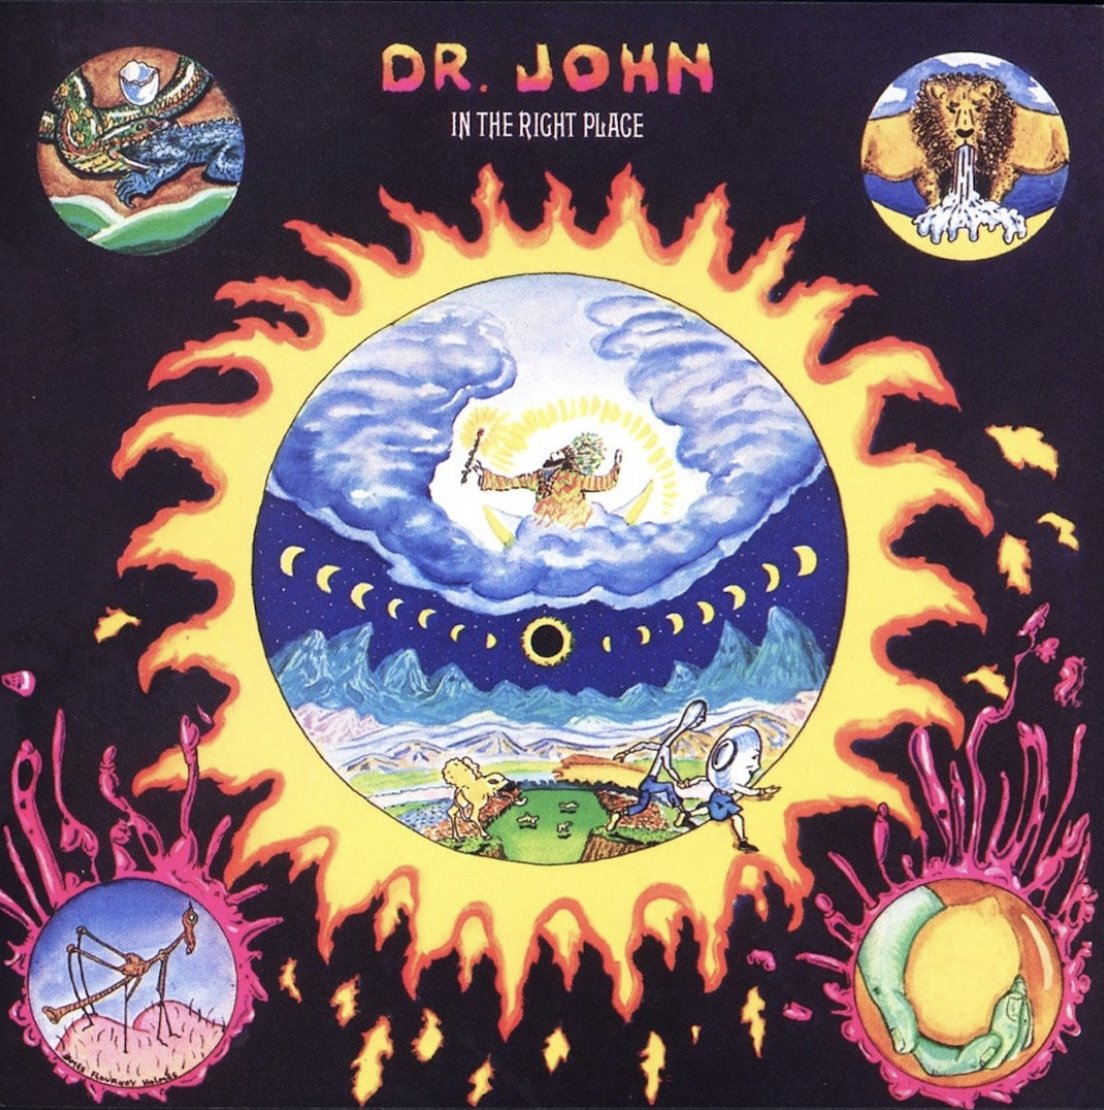 51 years ago today, #DrJohn released his 6th album: “In The Right Place” produced by fellow New Orleans legend #AllenToussaint, and featuring #TheMeters. 'Right Place, Wrong Time” would become a hit single. #RightPlaceWrongTime #InTheRightPlace